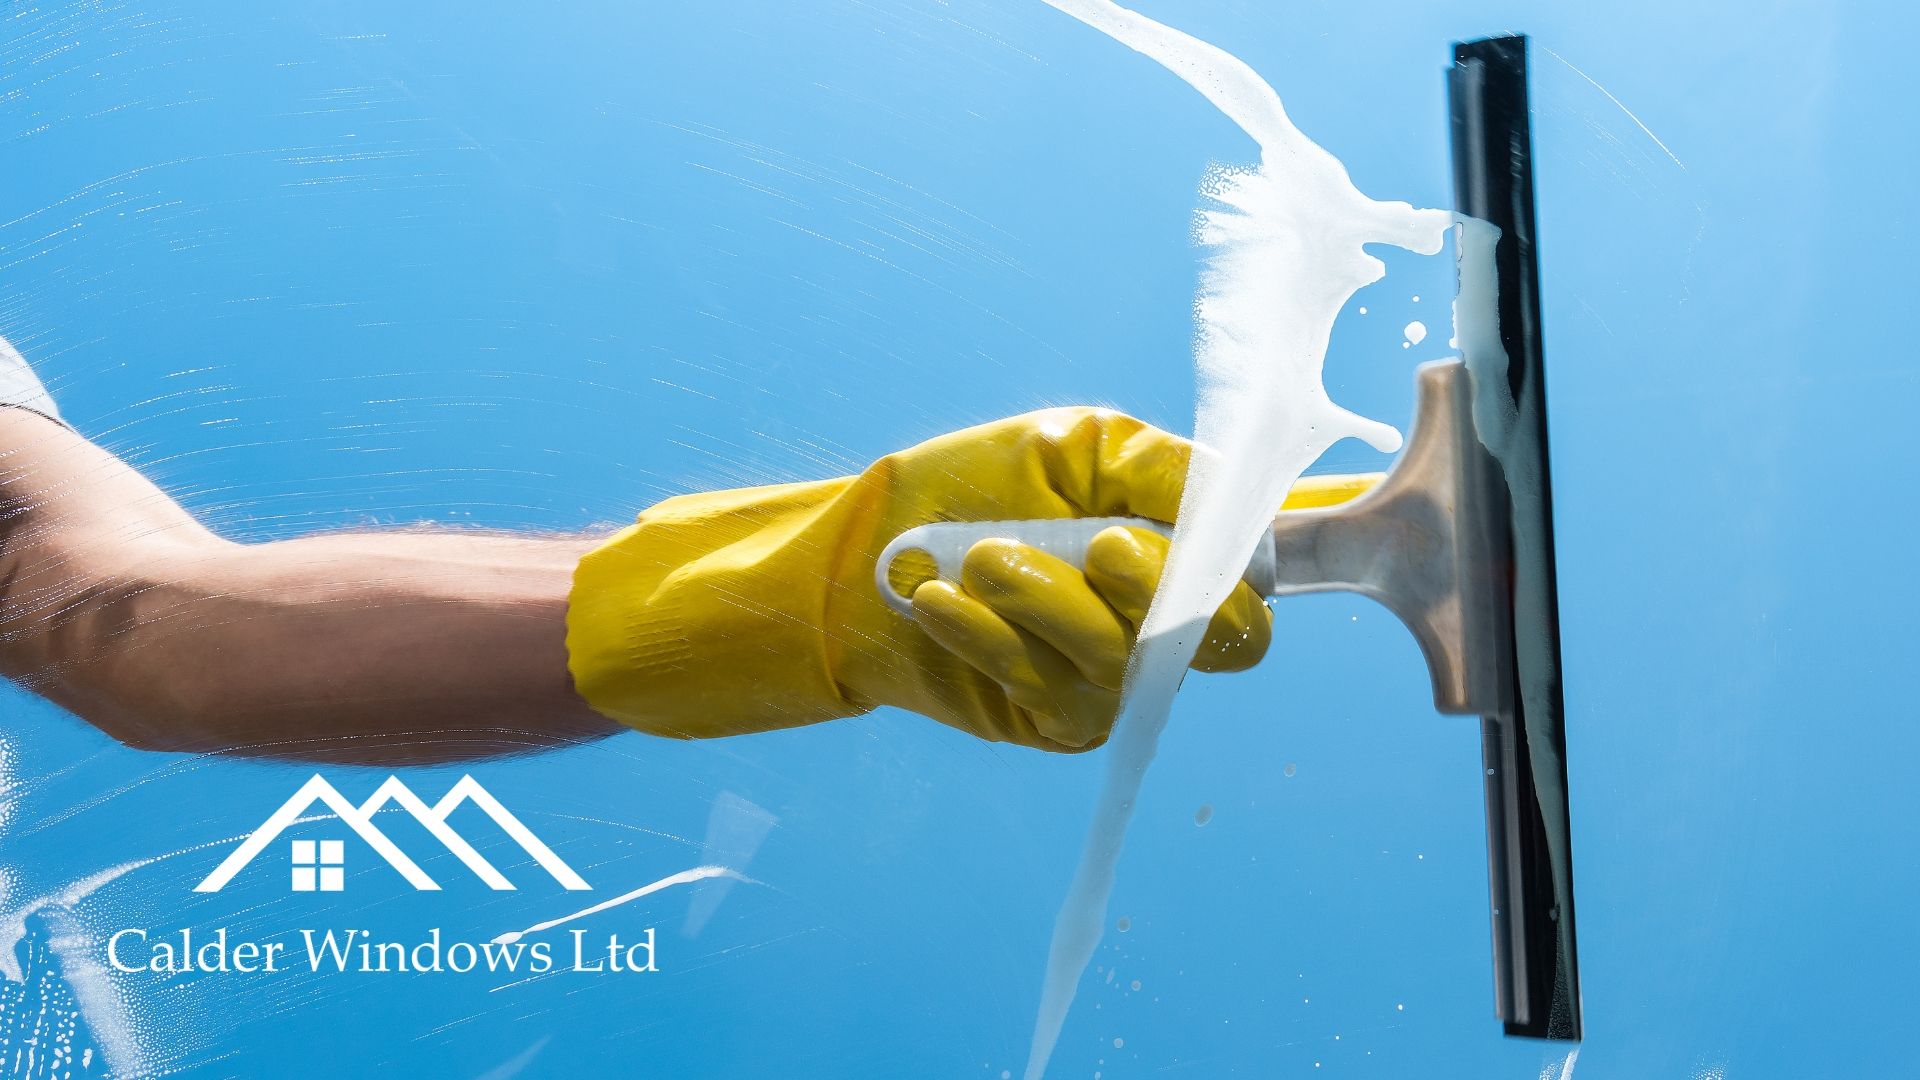 You've invested in beautiful new uPVC doors and windows. Would you like to keep them in showroom condition? Read on for top cleaning tips.
